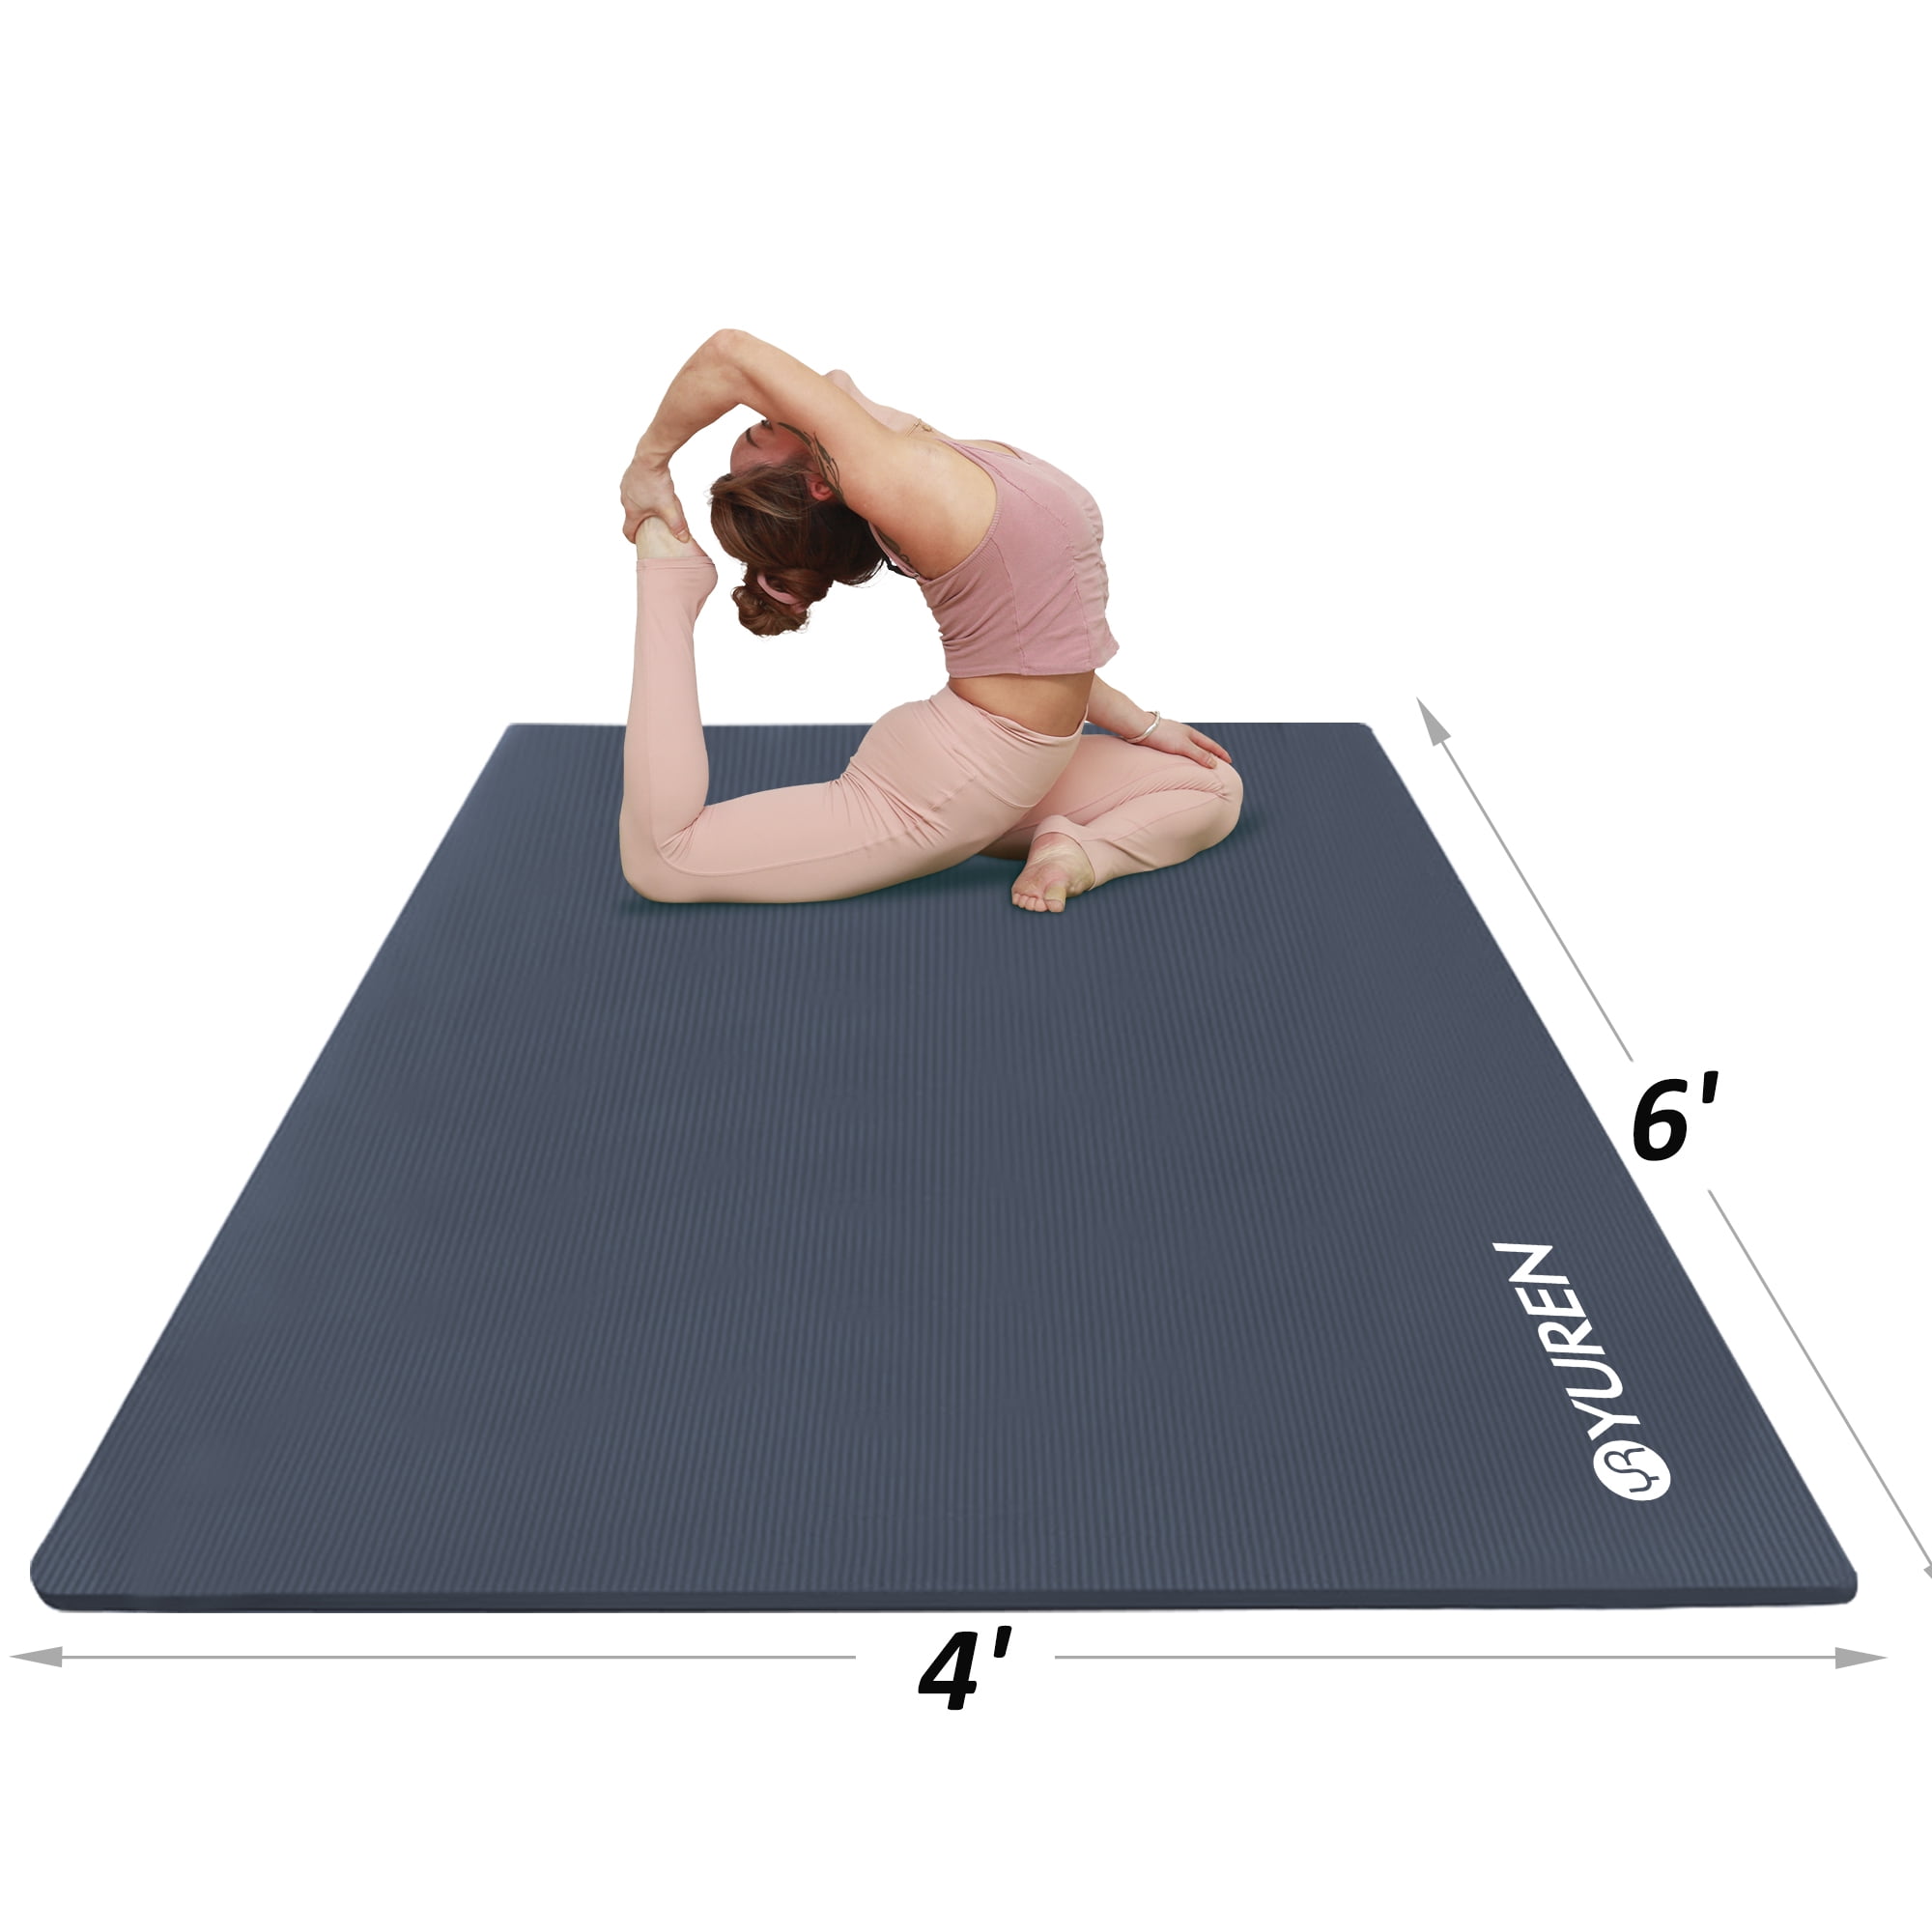 Kidnasium Wiggly Workout Yoga Mat, 3mm Thickness, PVC 